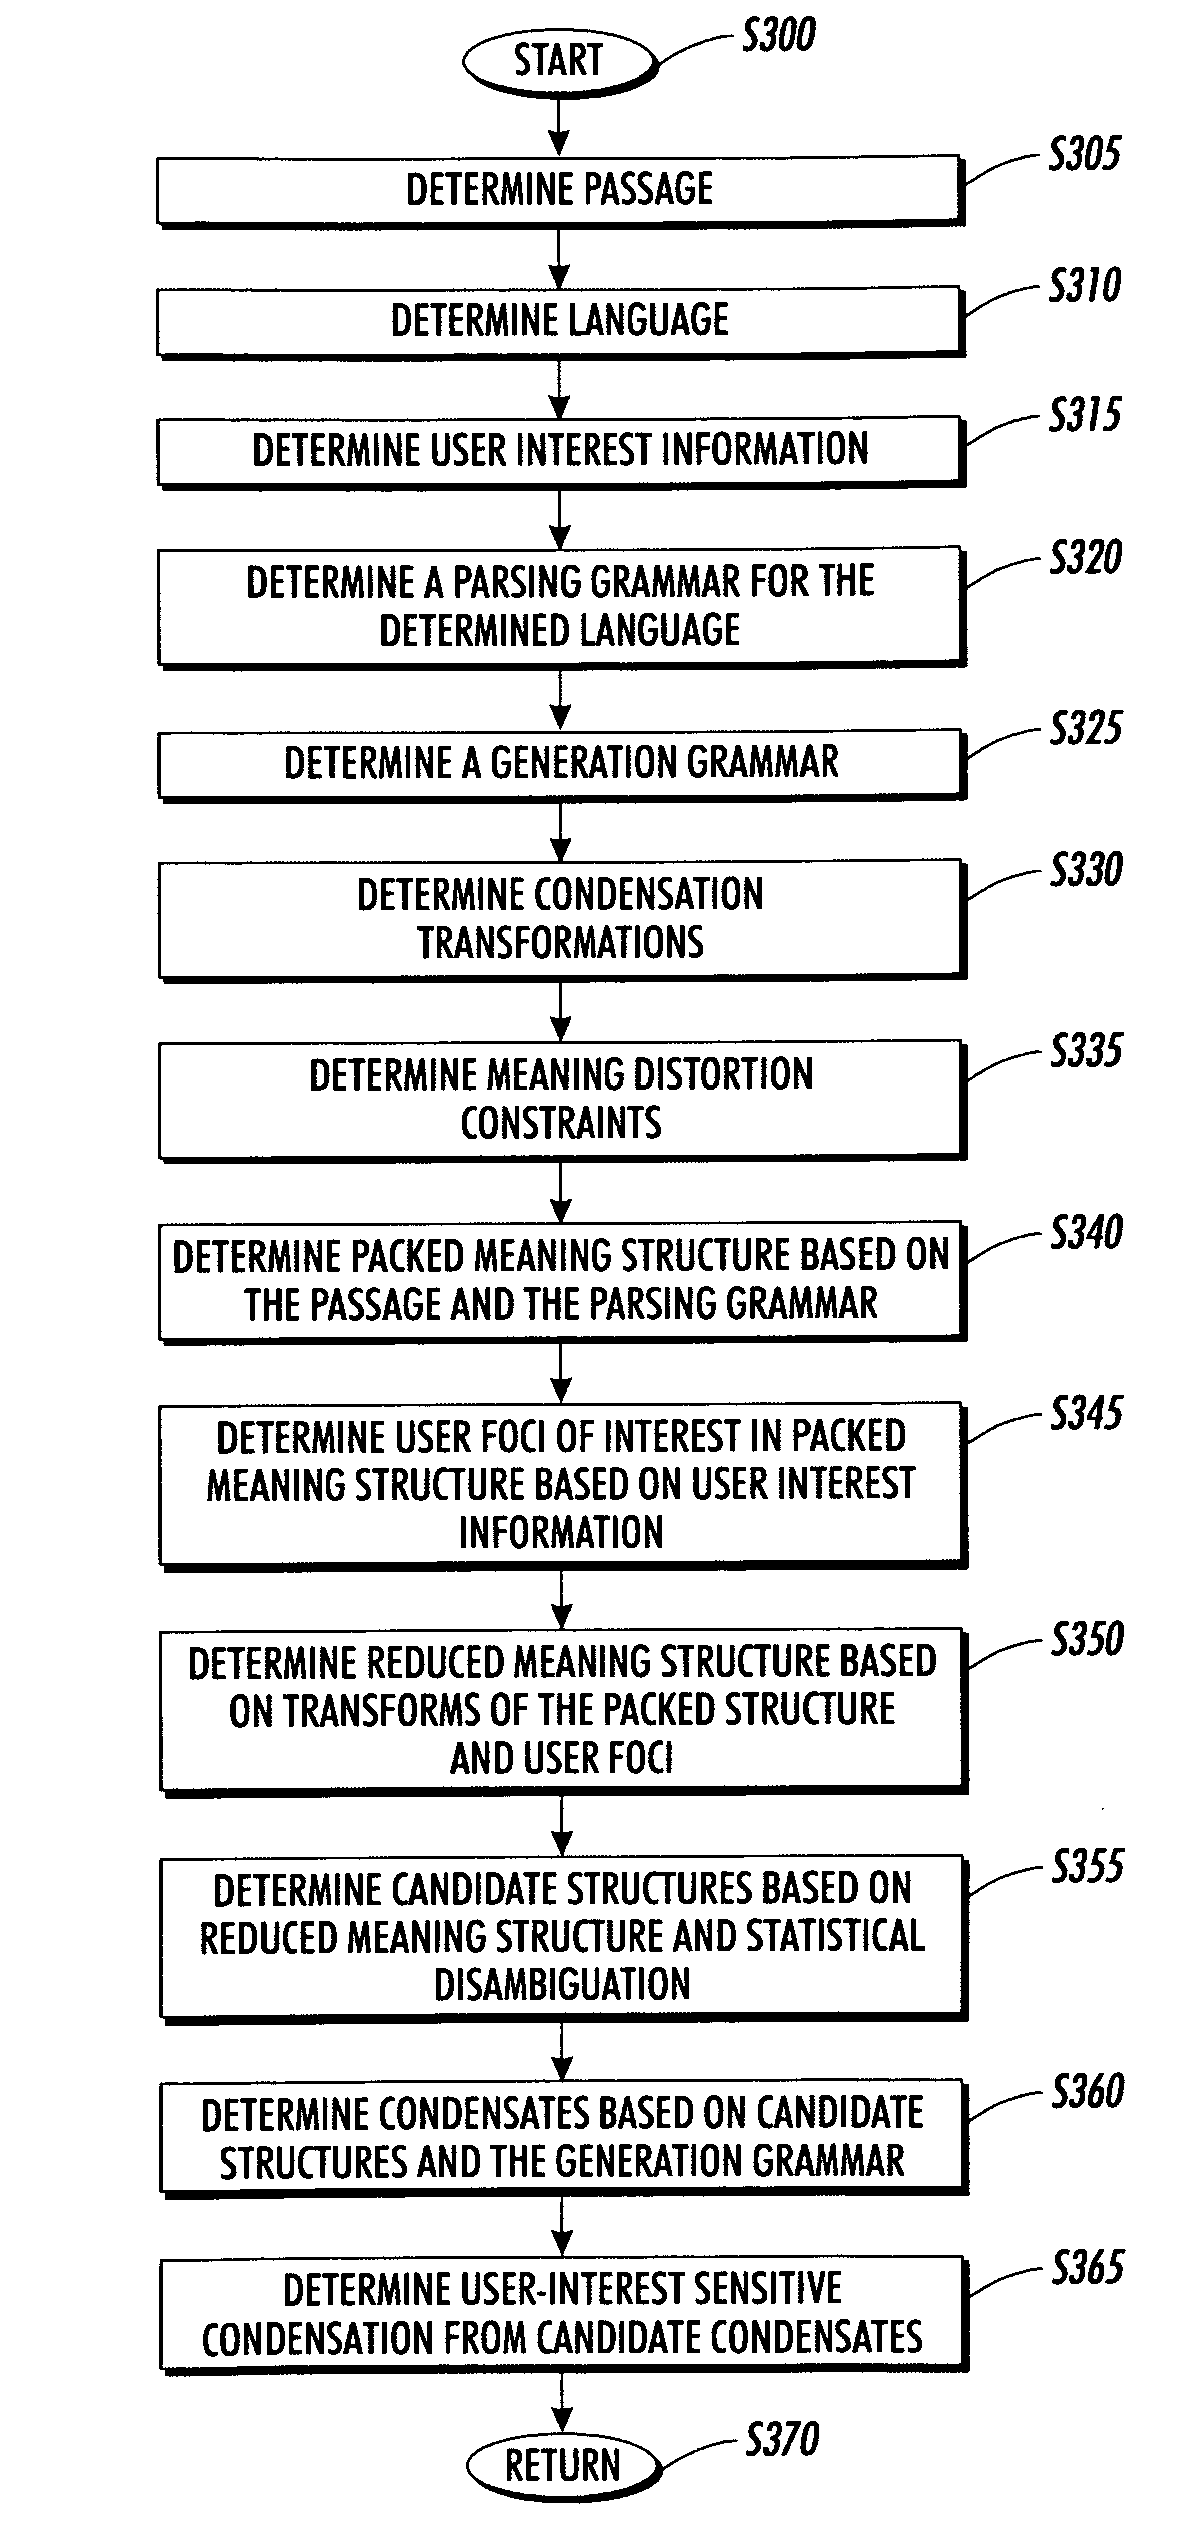 Systems and methods for using and constructing user-interest sensitive indicators of search results